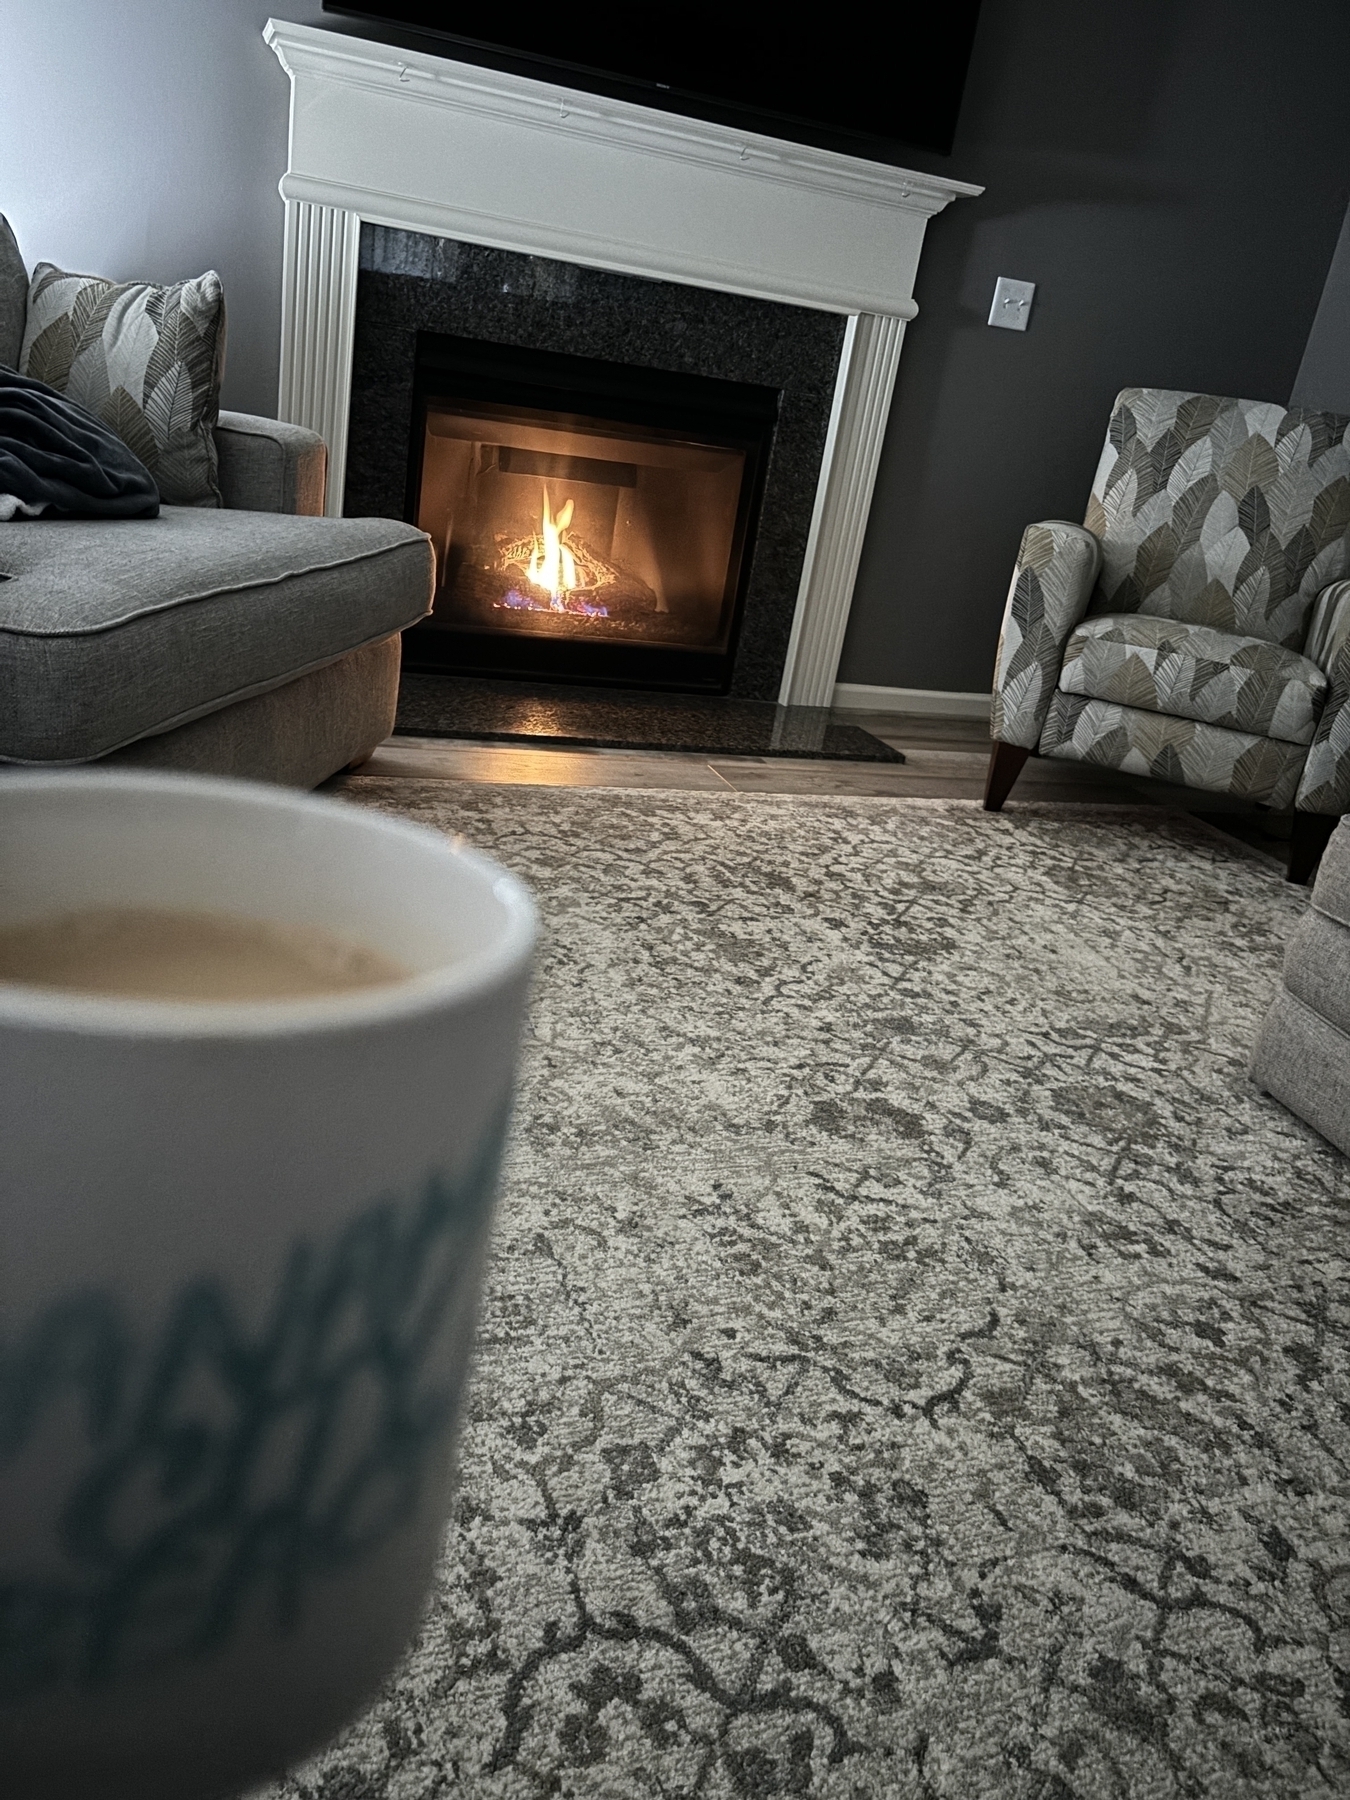 A mug of coffee in front of a fireplace 